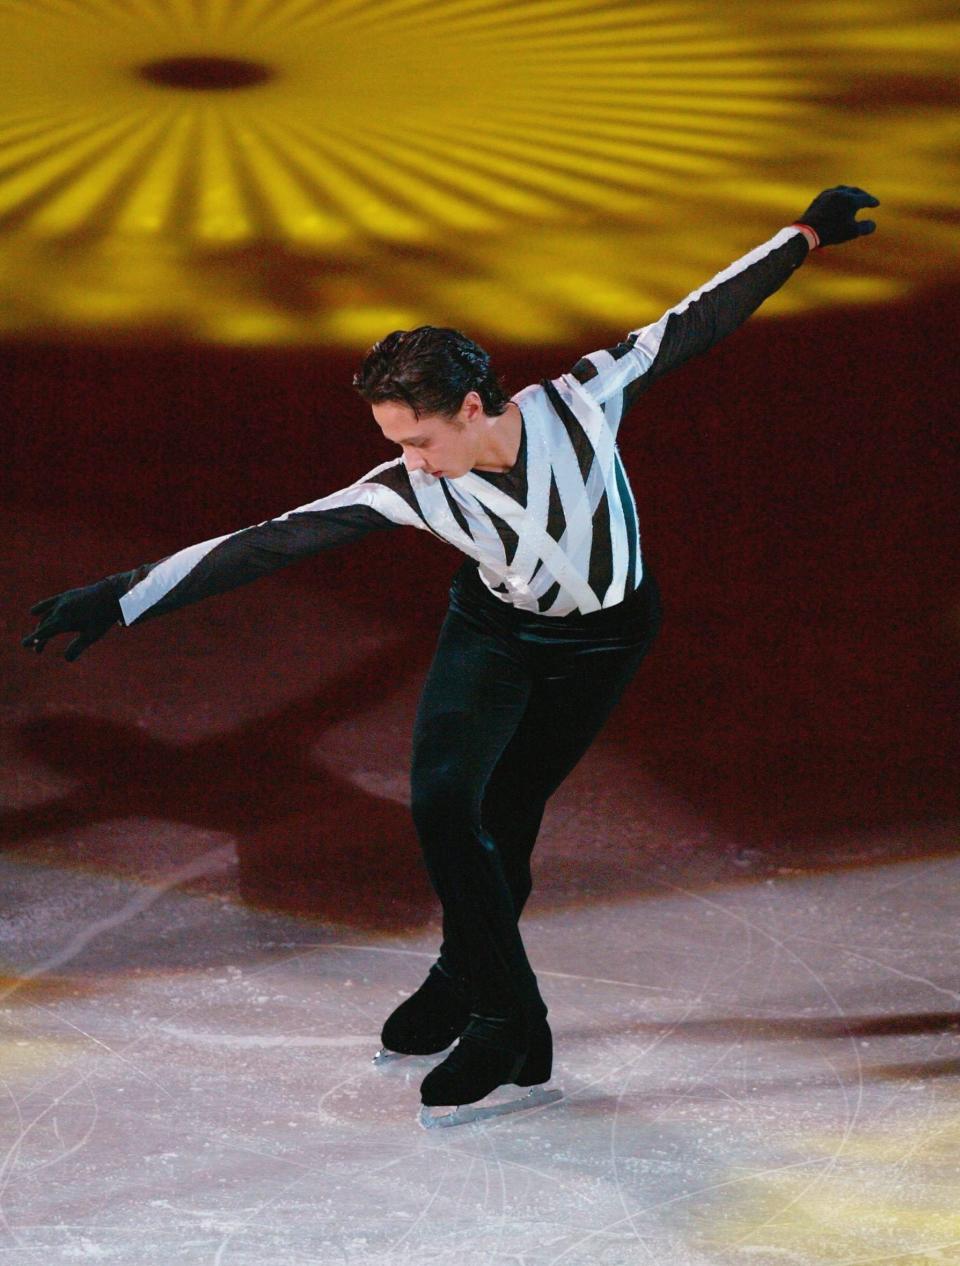 Performing at the&nbsp;Exhibition Gala at the 2004 World Figure Skating Championships in Dortmund, Germany, on March 28, 2004.